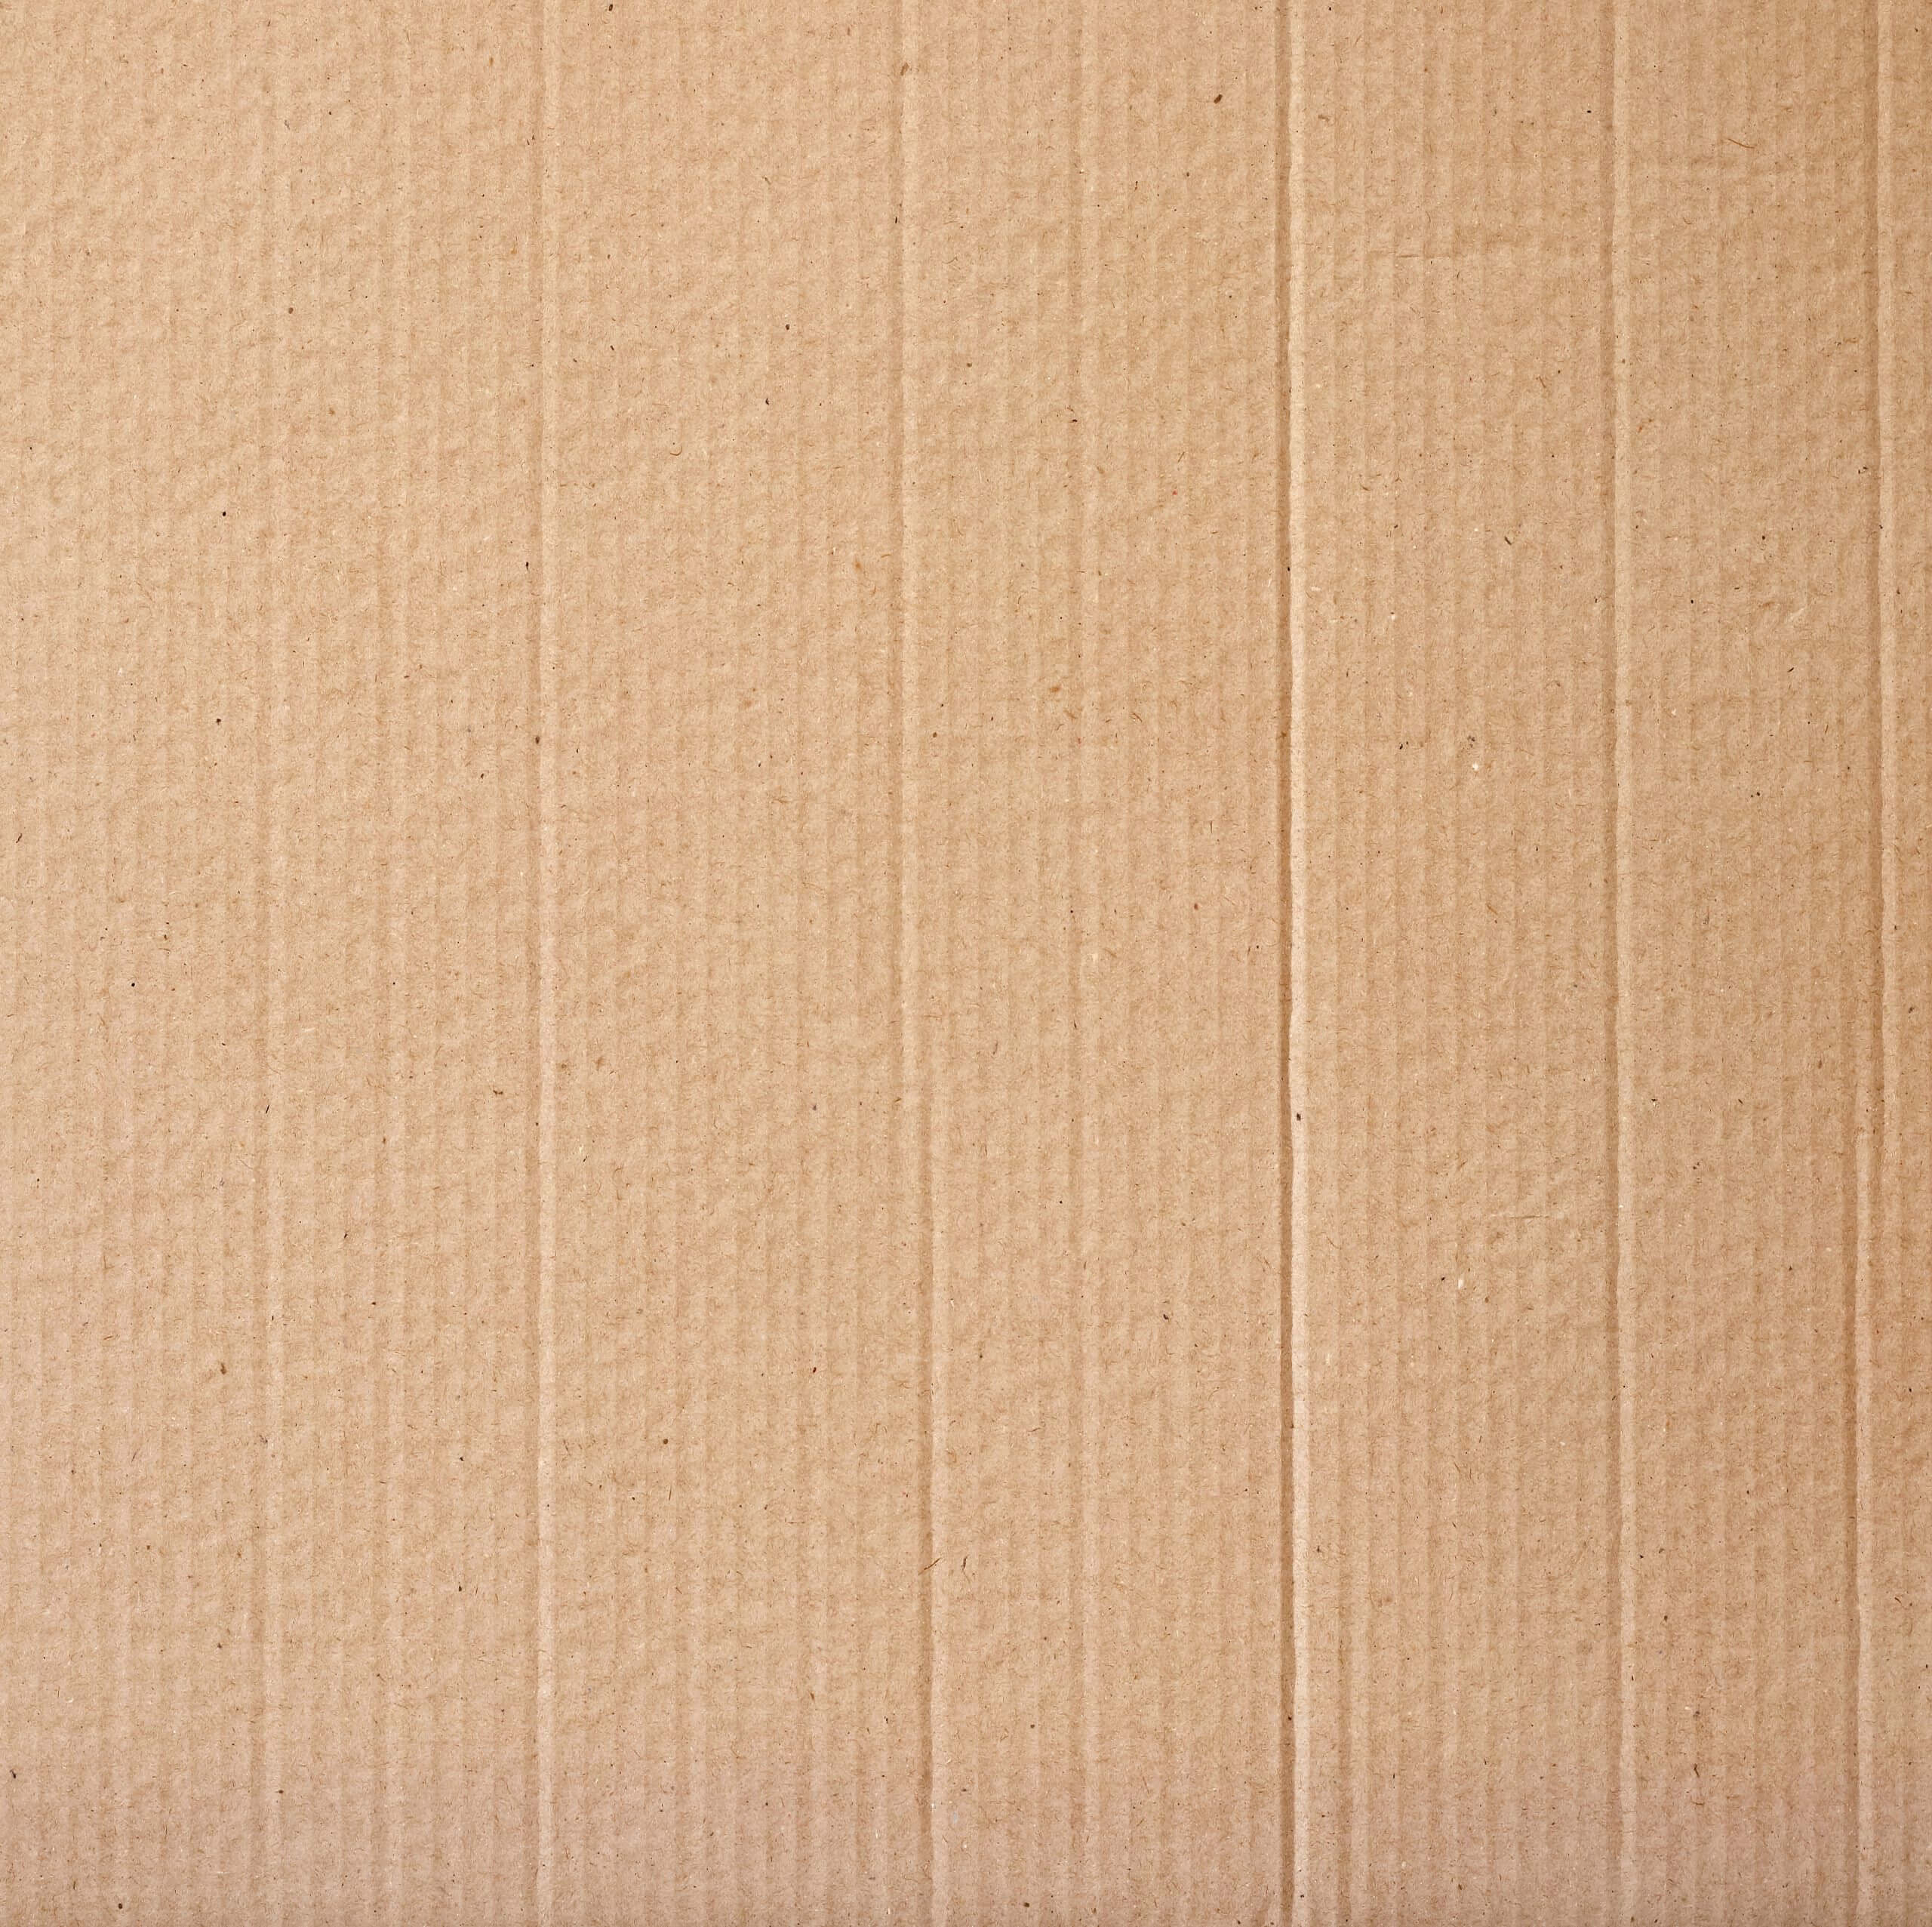 A close up image of Corrugated Cardboard Sheeting (Triple Wall).